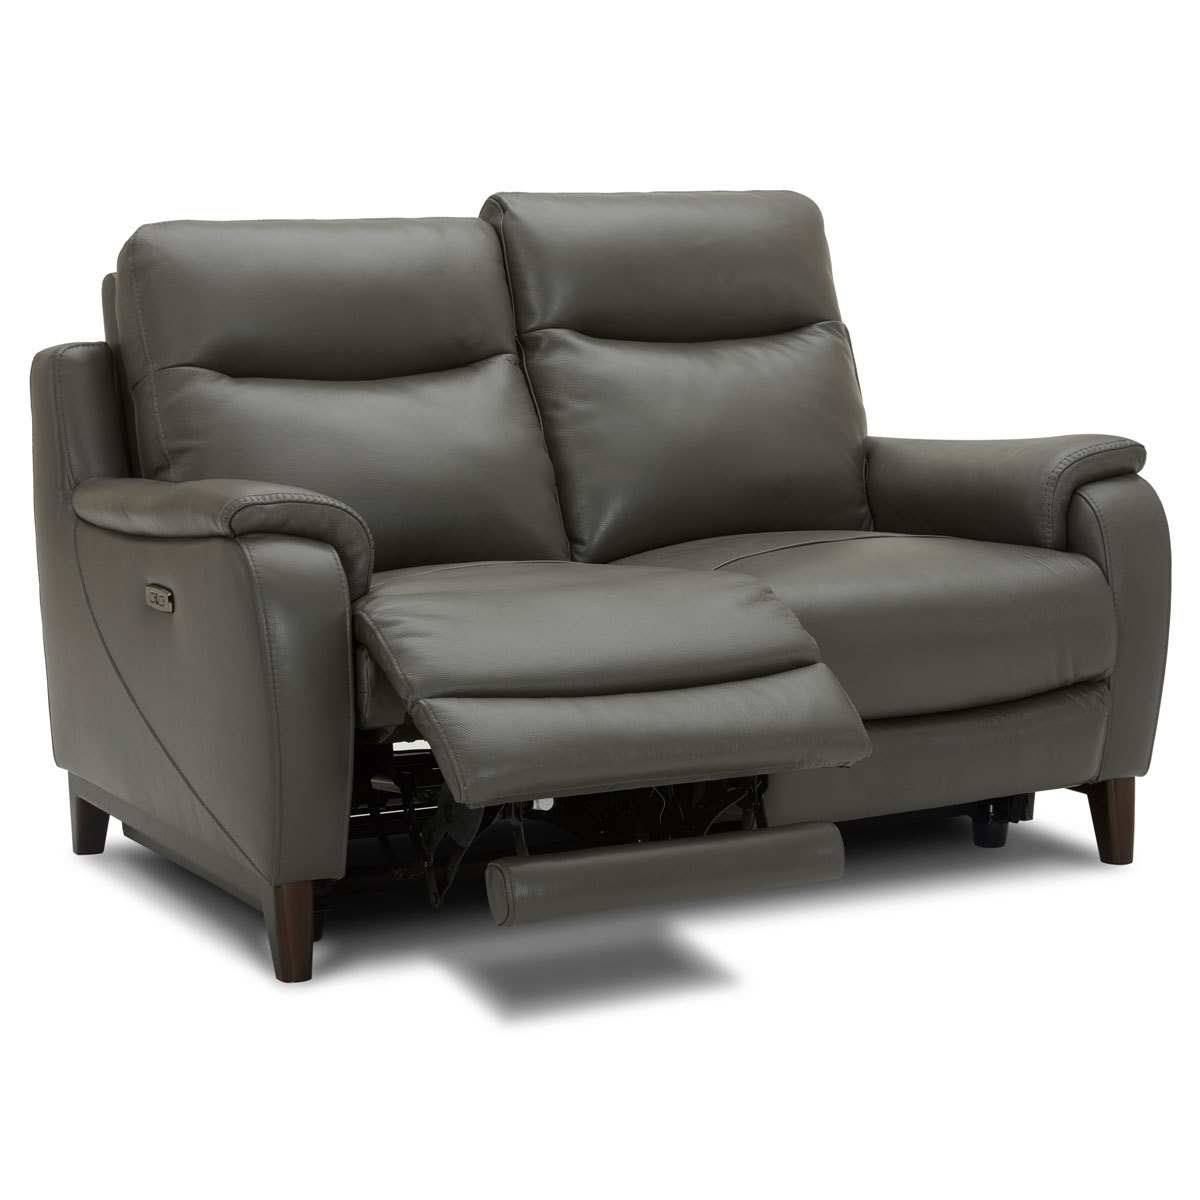 Cut out image of Kuka Leather Power 2 Seater Sofa reclined